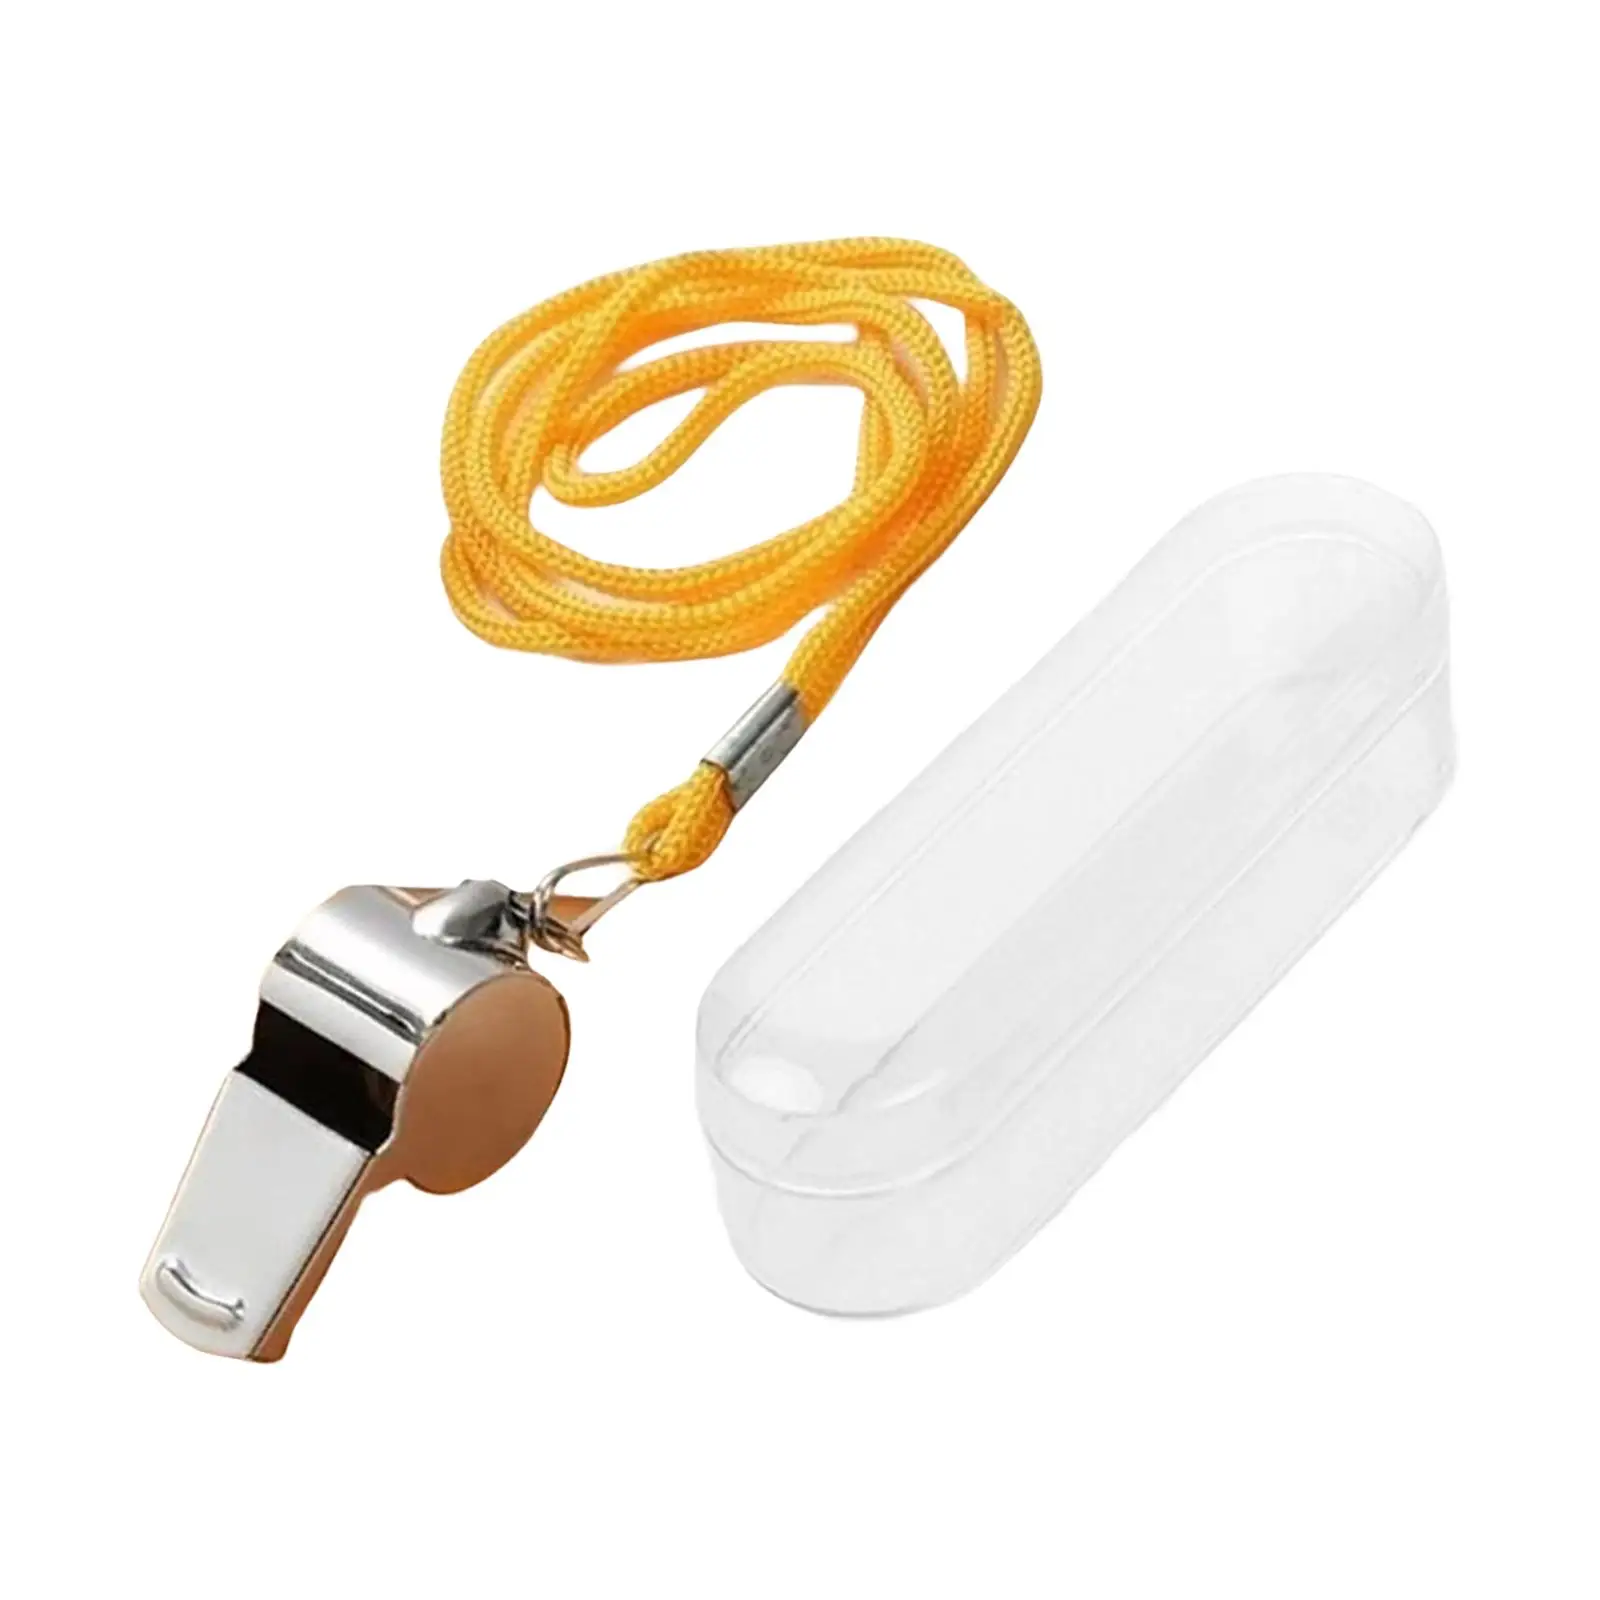 Sports Whistles with Lanyard Referee Whistle Loud Crisp Sound Metal Whistle for Football Soccer Dog Training Outdoor Survival